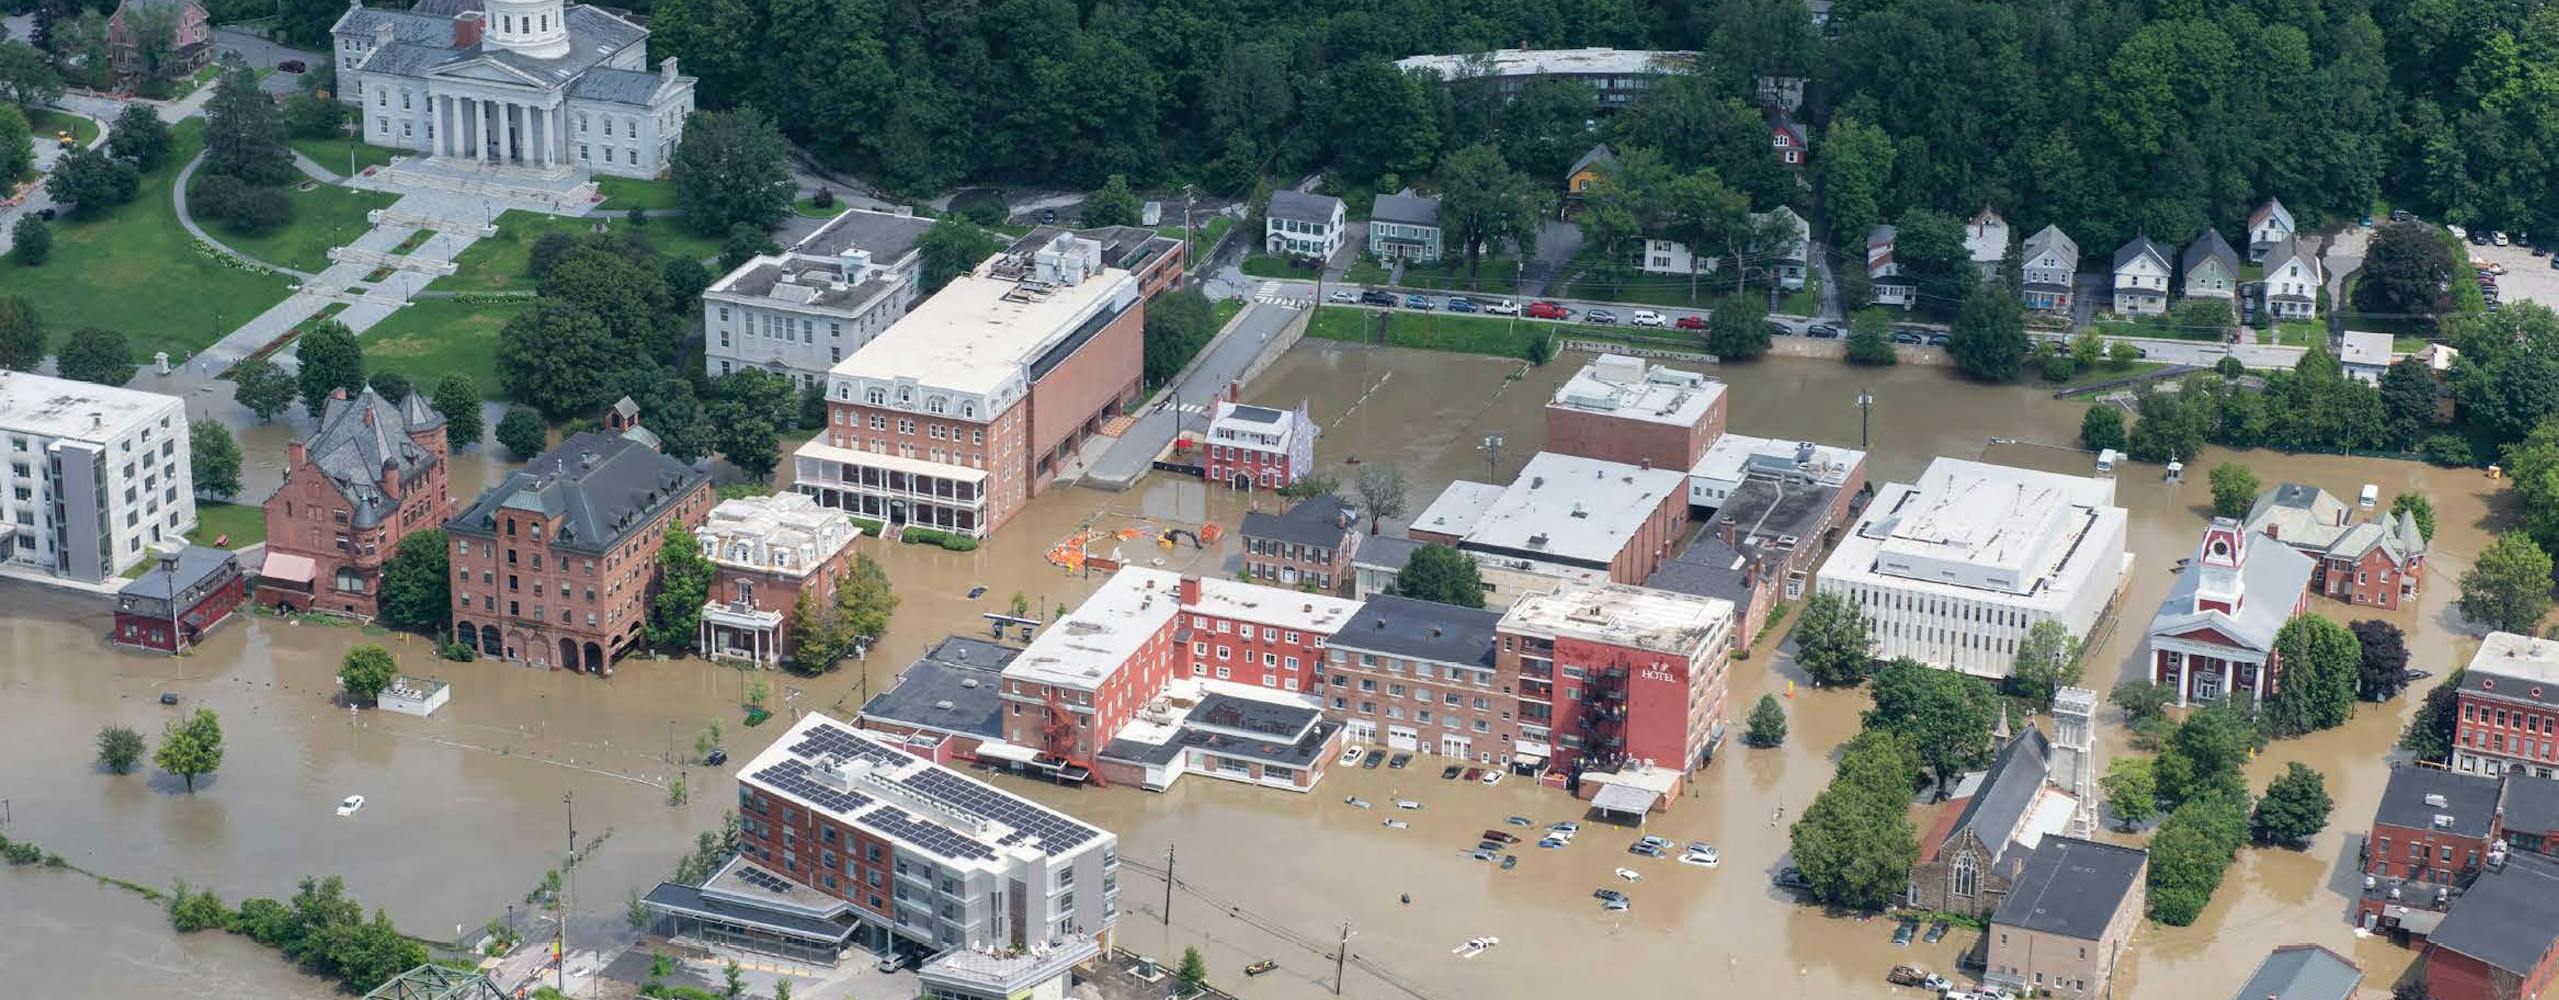 Flooding in Vermont